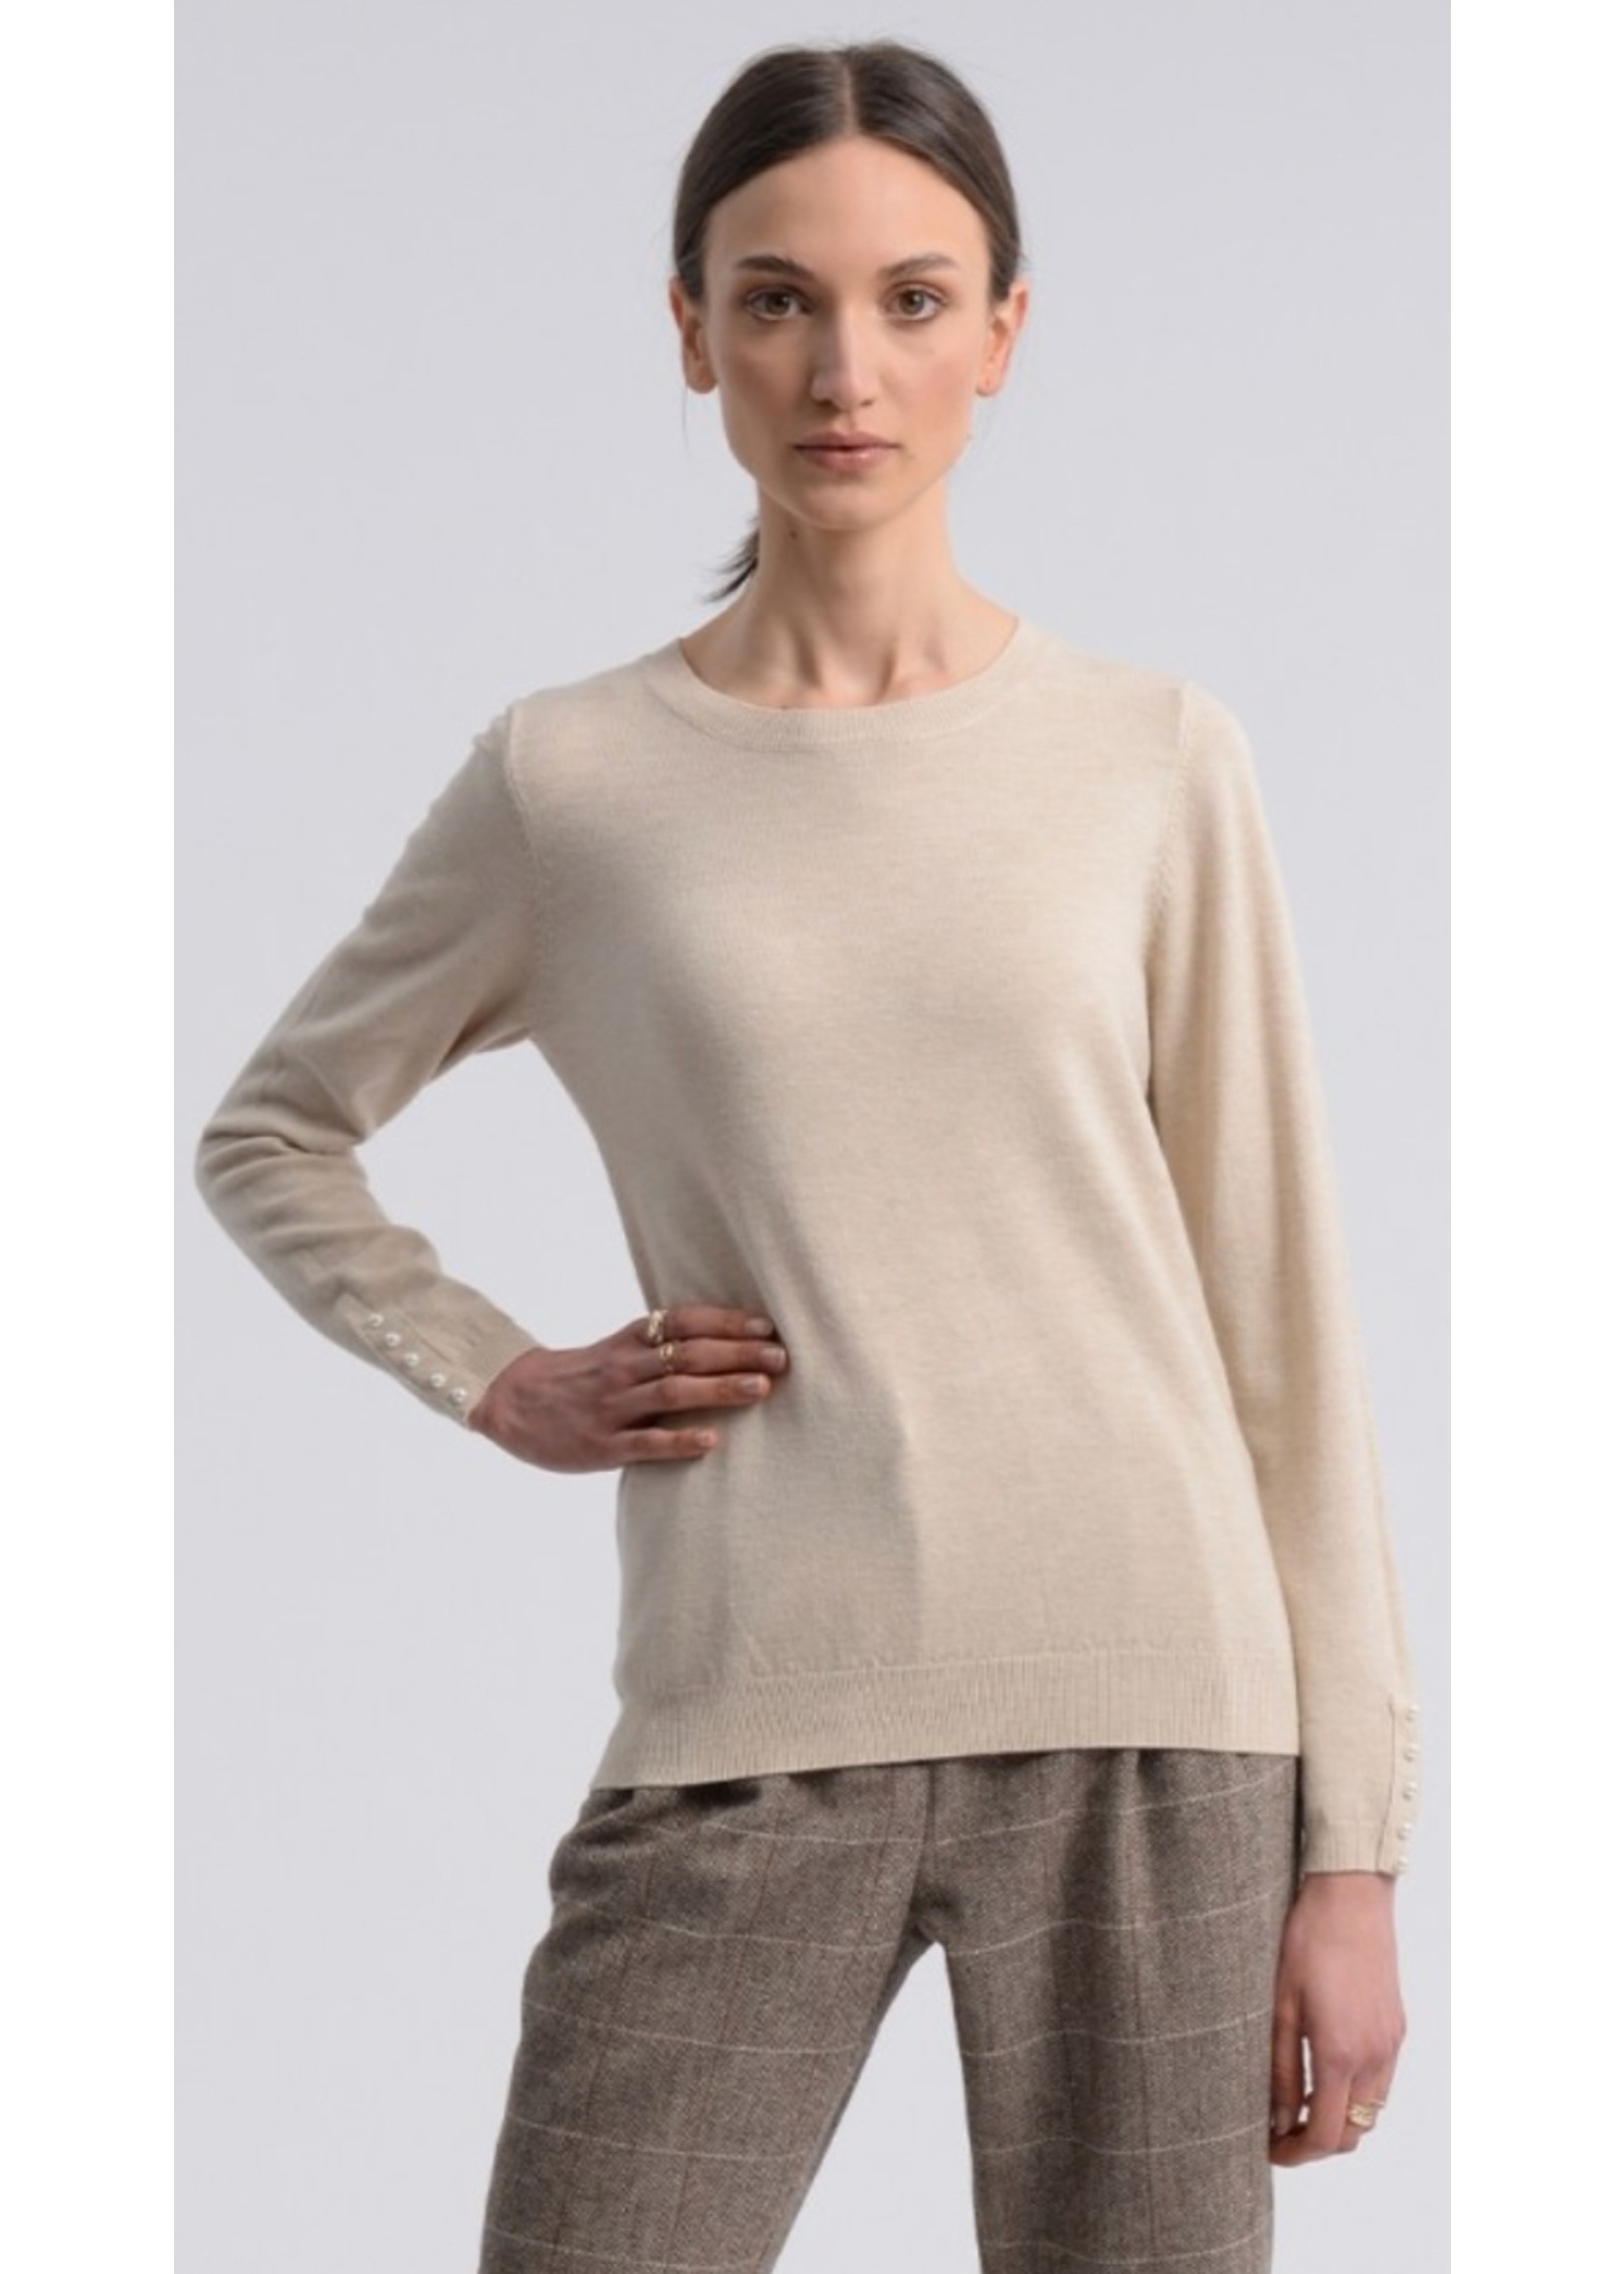 Molly Bracken Claire Pearl Sweater